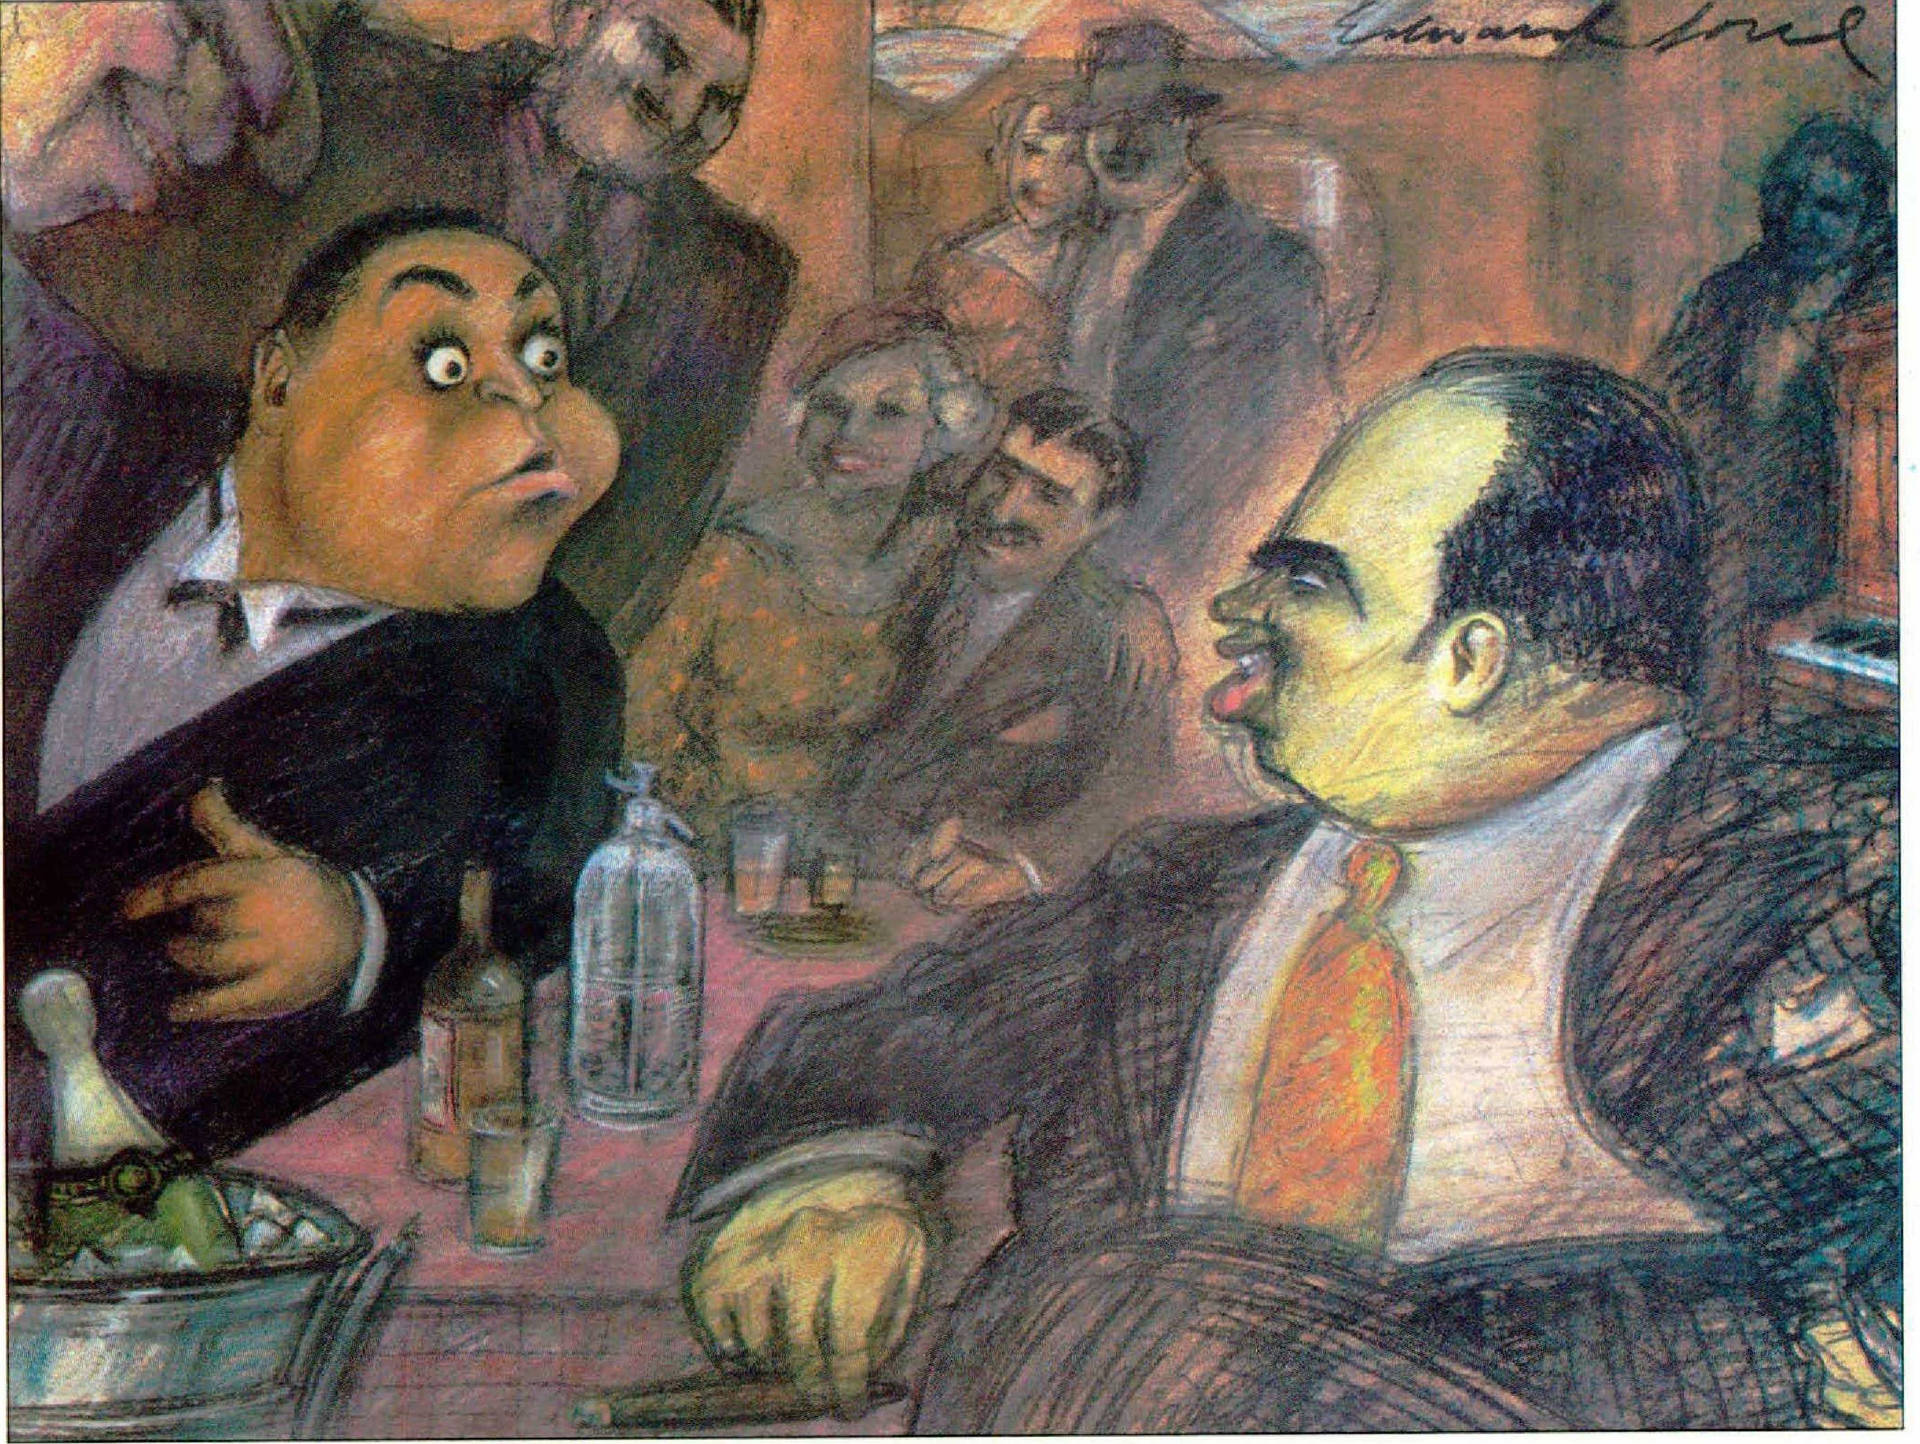 Fats Waller And Al Capone Painting Wallpaper